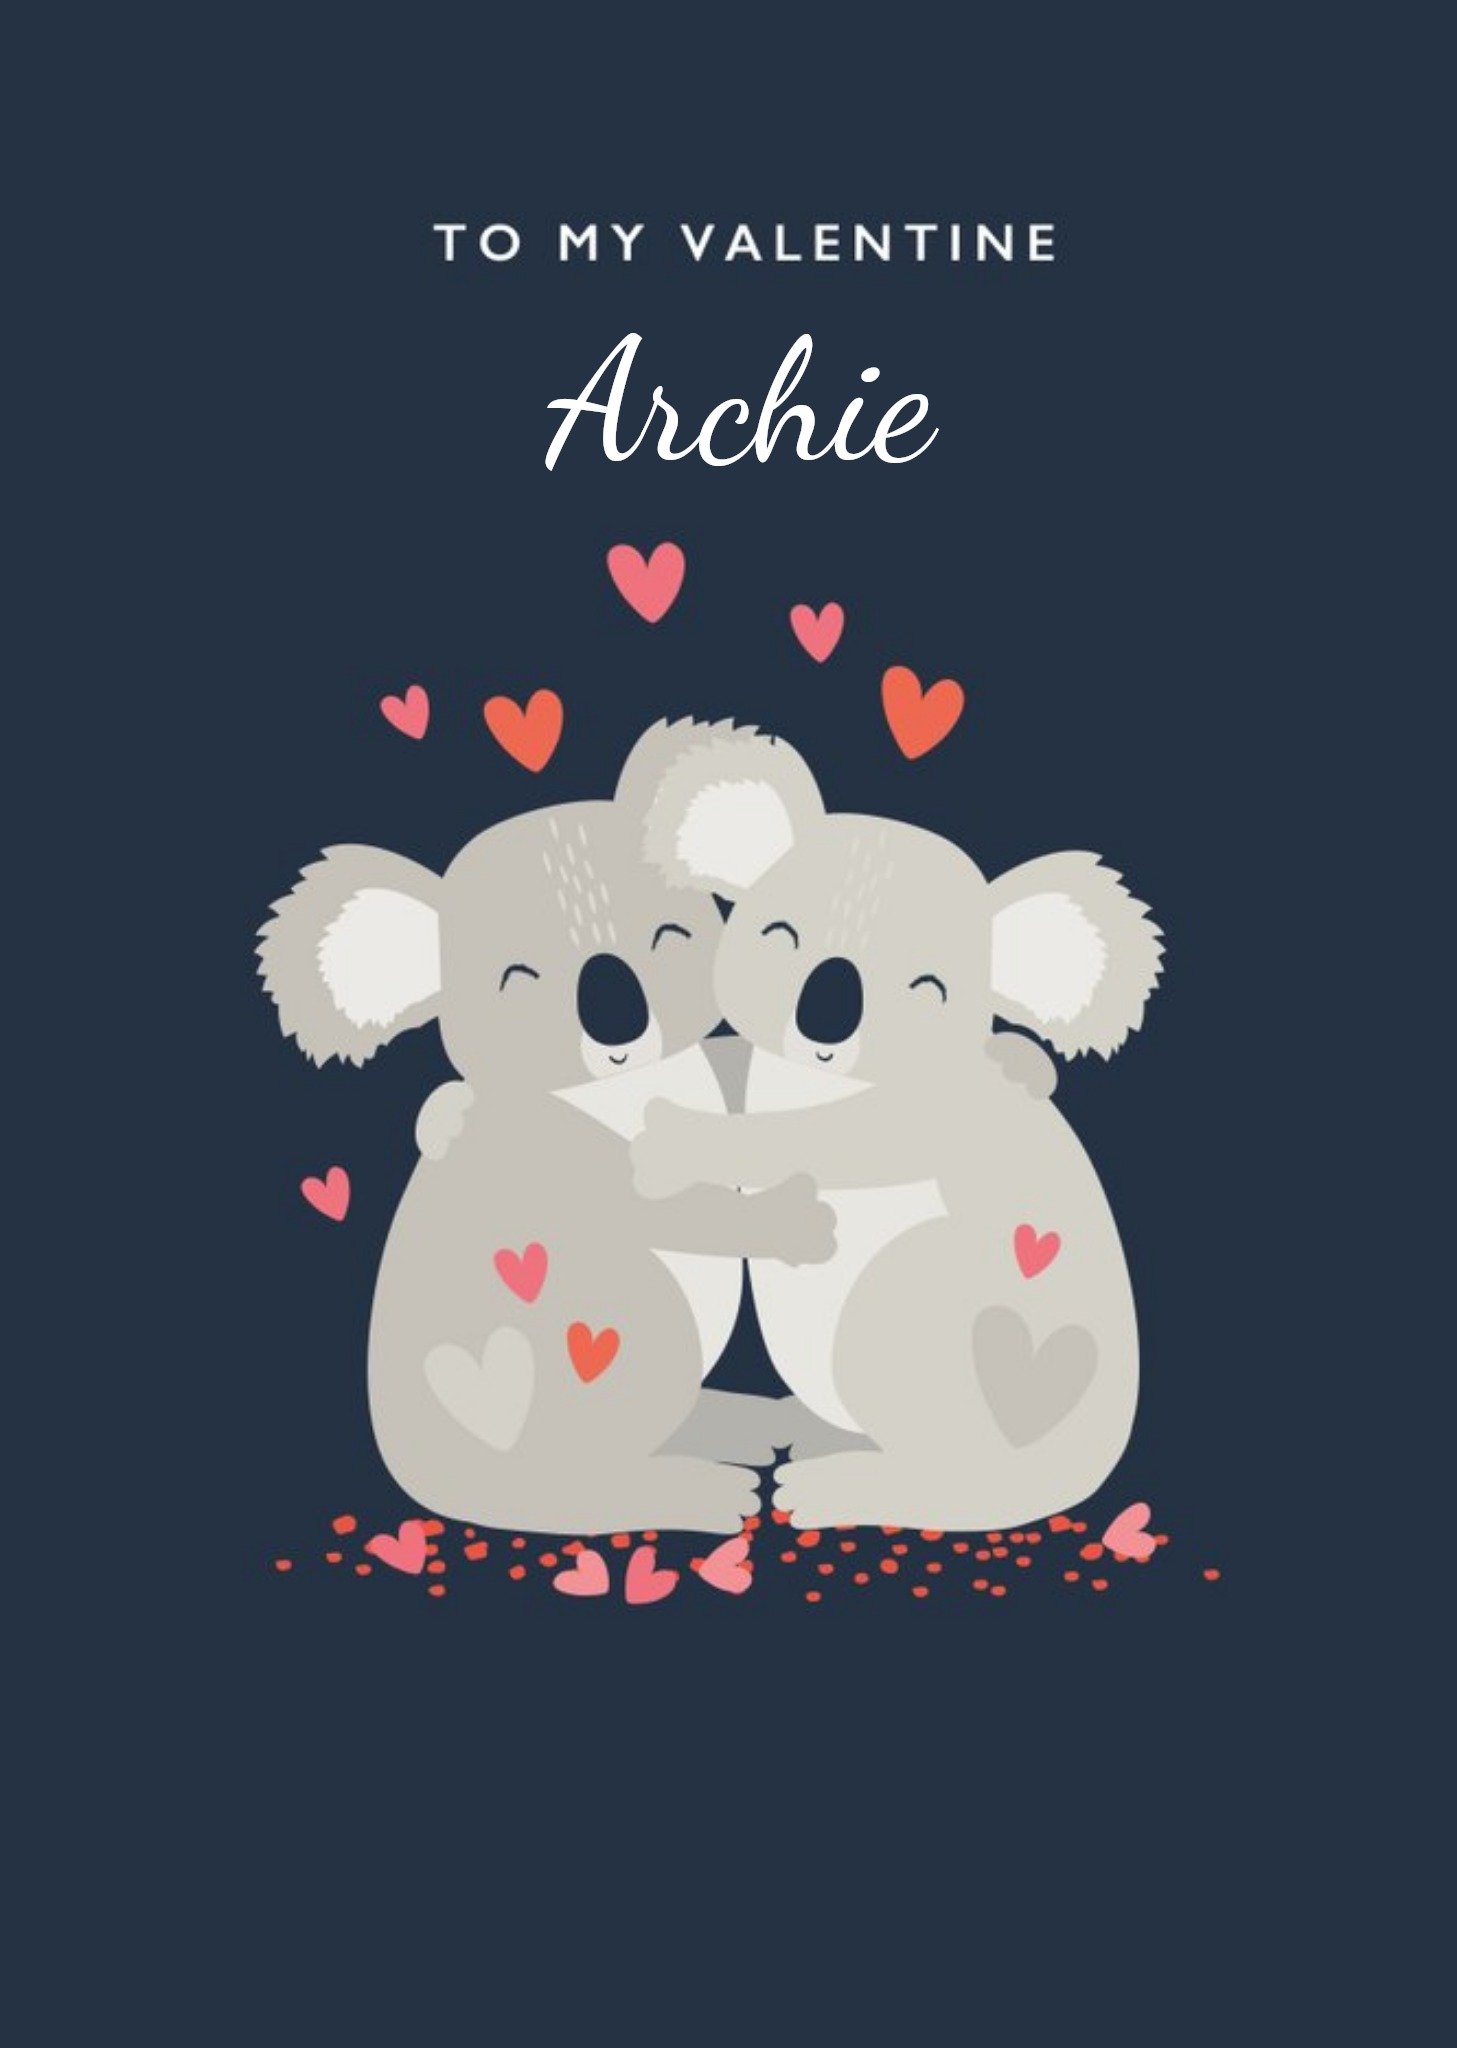 Moonpig Cute Illustration Of A Pair Of Koalas Hugging On A Blue Background Valentine's Day Card Ecar